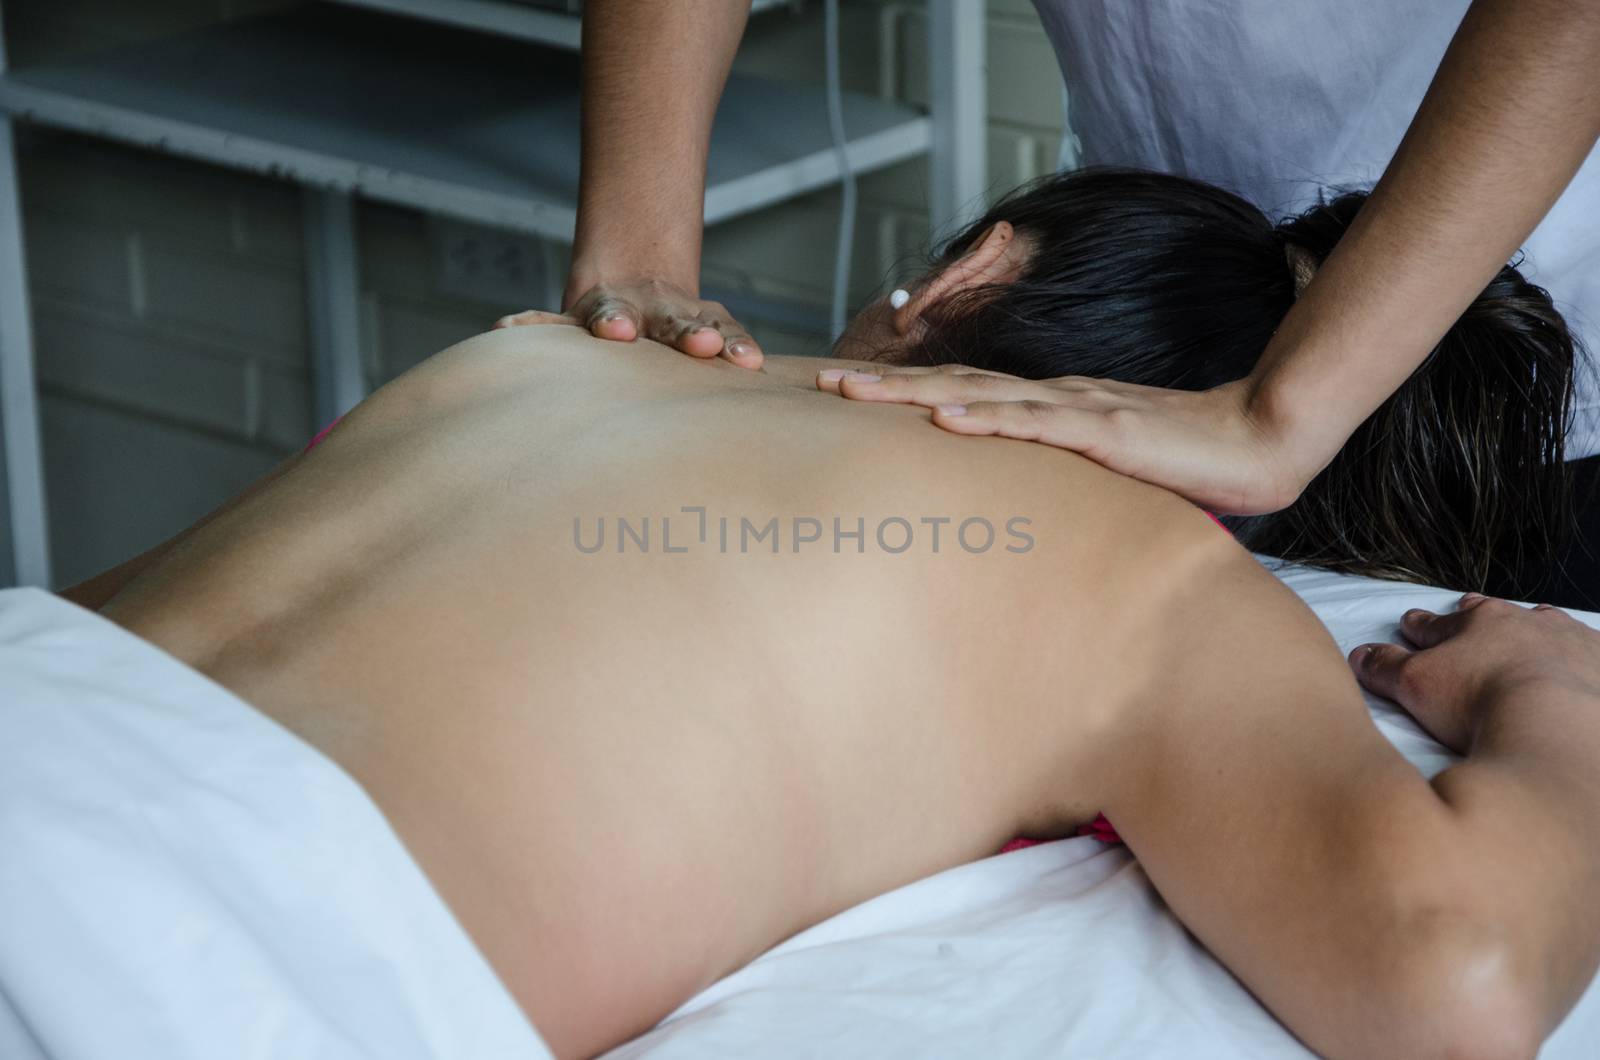 Cosmiatra doing relaxing massages to a patient